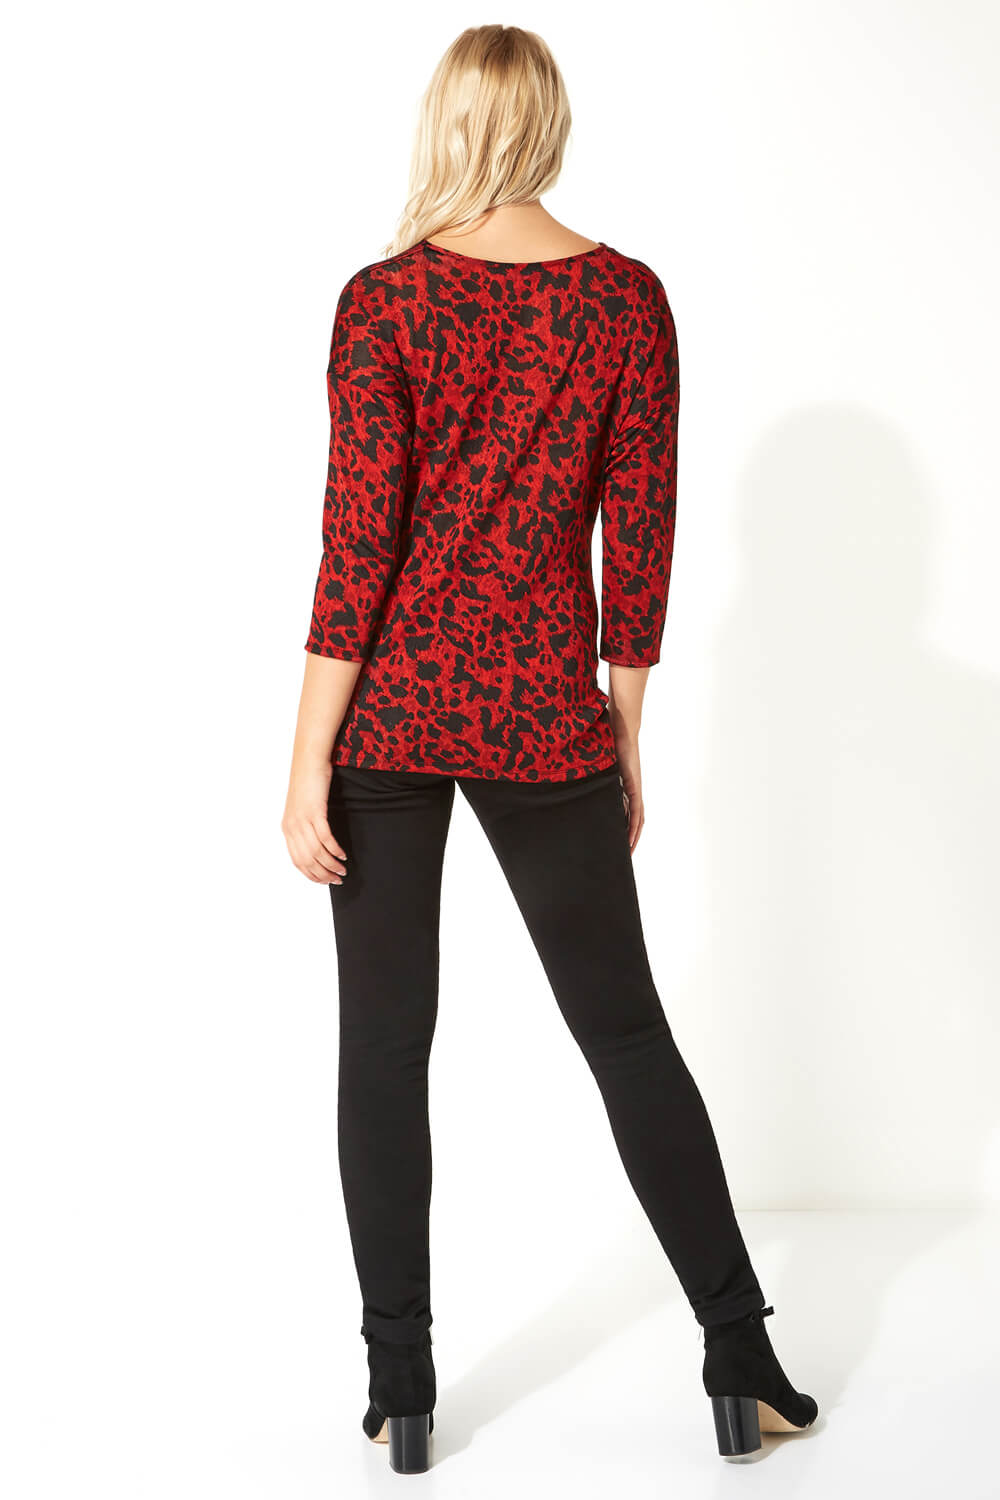 Red Animal Print Twist Front Top, Image 3 of 5